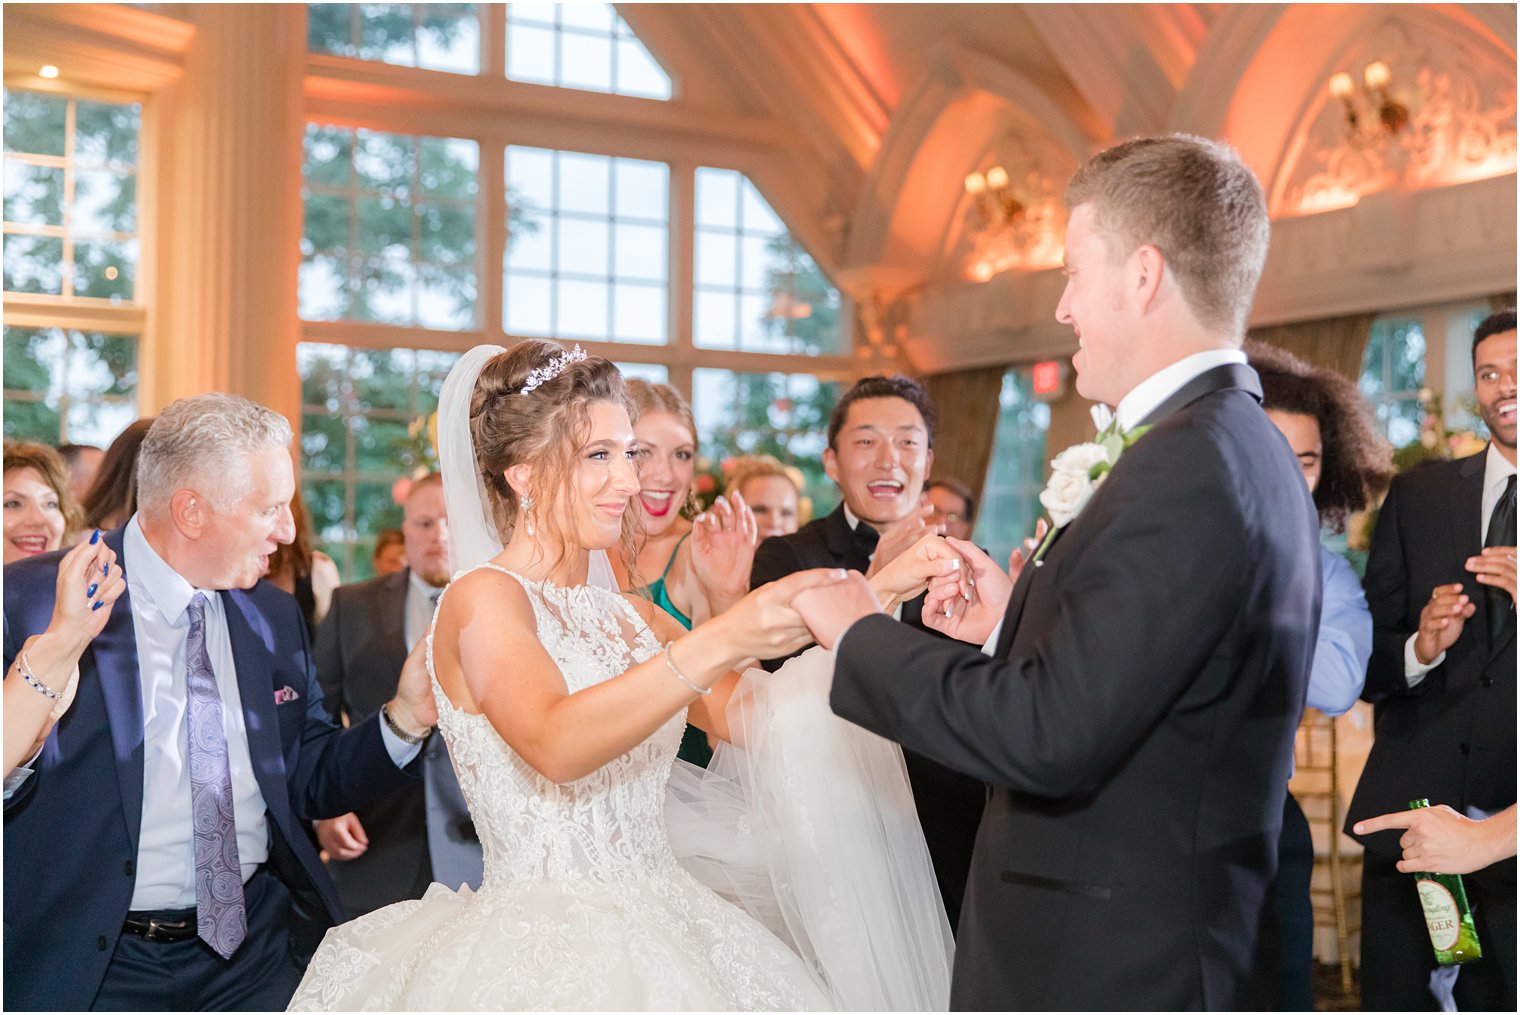 bride and groom dance during Allentown NJ wedding reception with guests